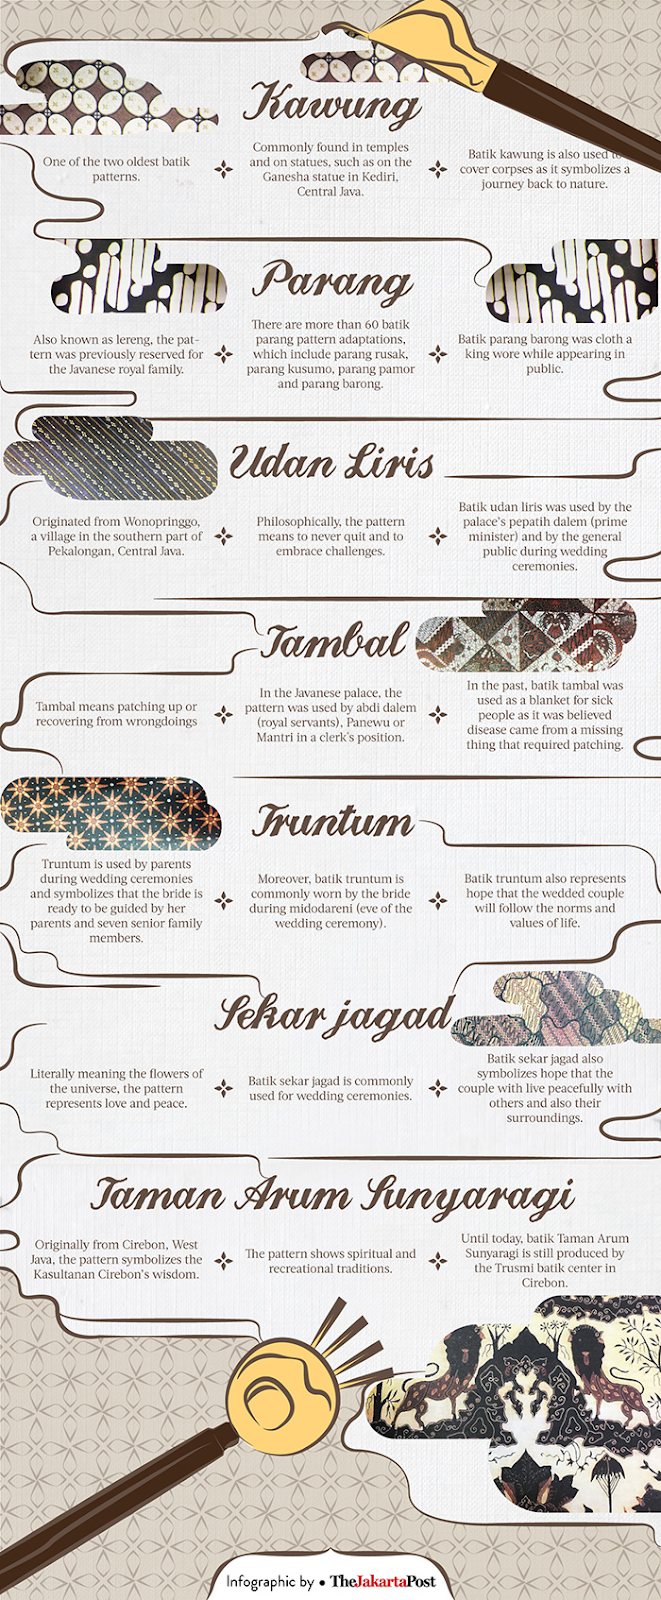 An infographic showing common batik motifs, their names and a short blurb about the motif and its meaning.